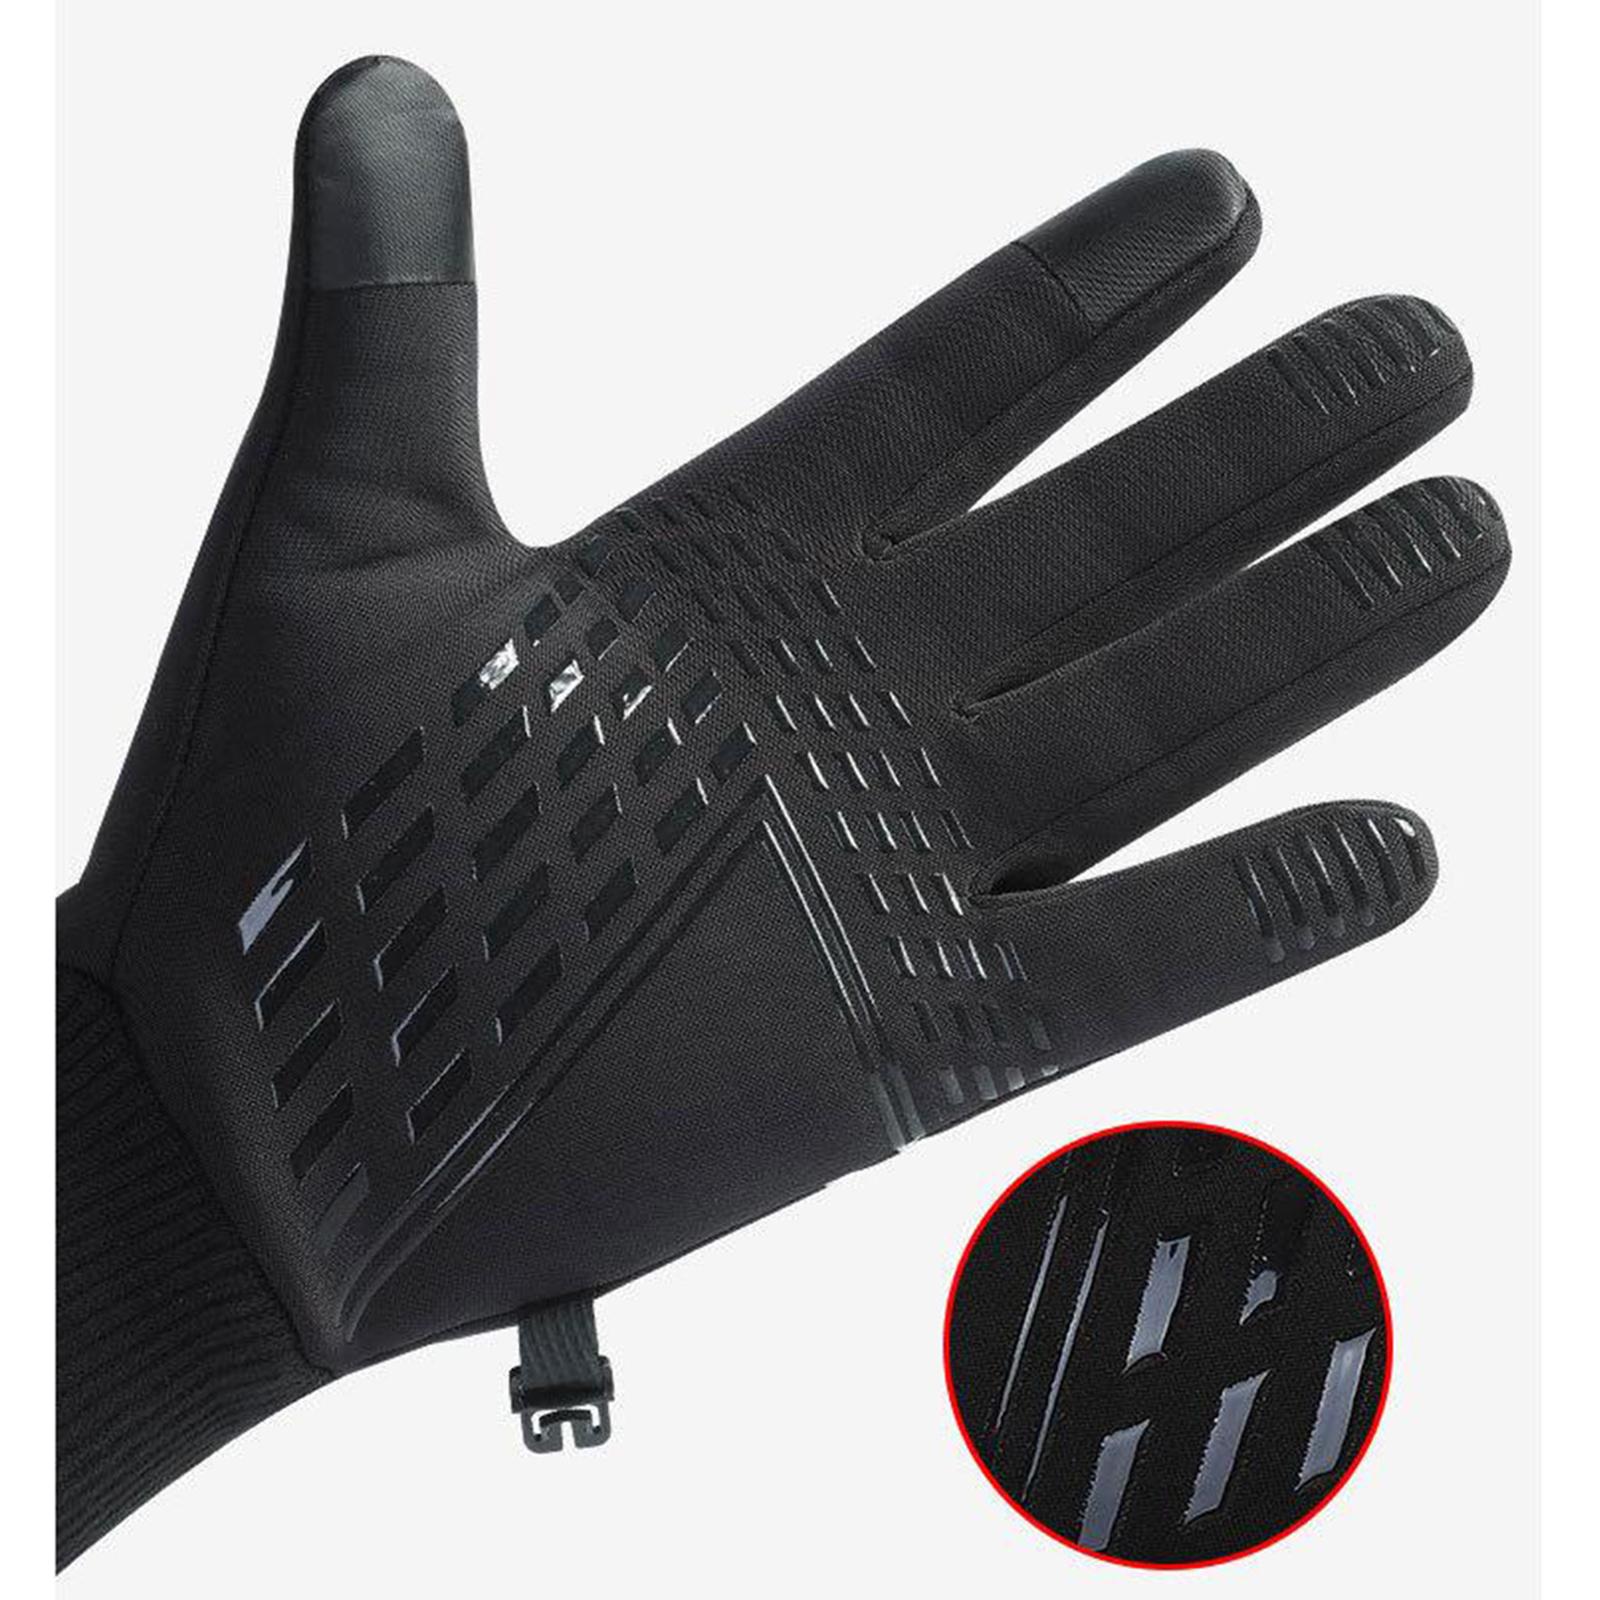 Winter Outdoor Cycling Hiking Sports Gloves Touch Screen L Gray K111